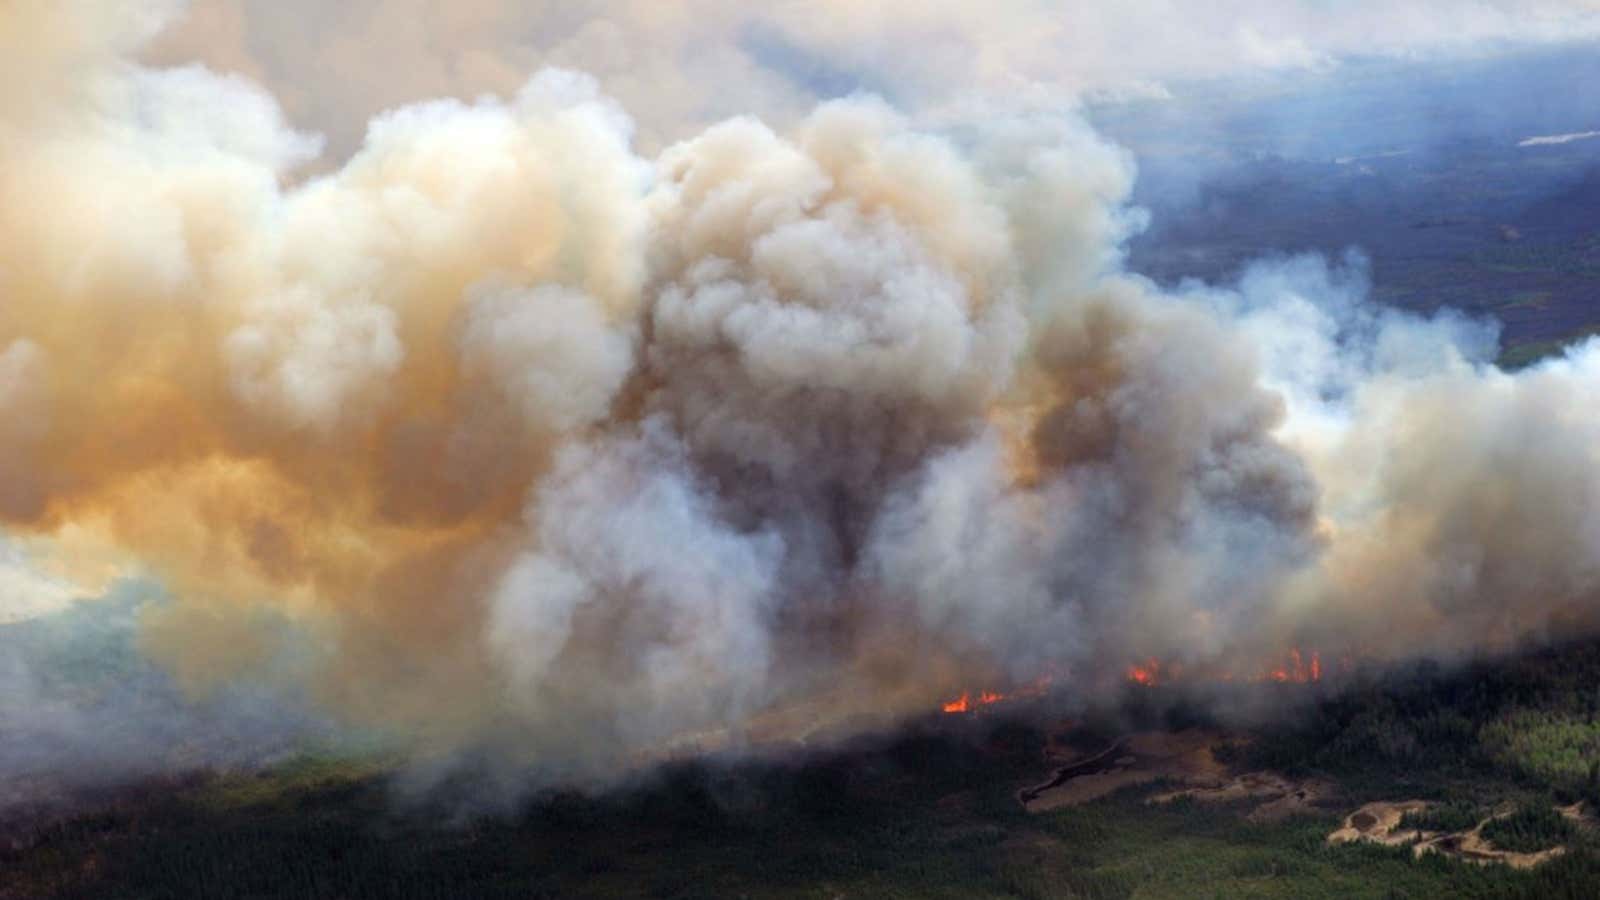 Smoke from this Canadian wildfire has traveled overseas.